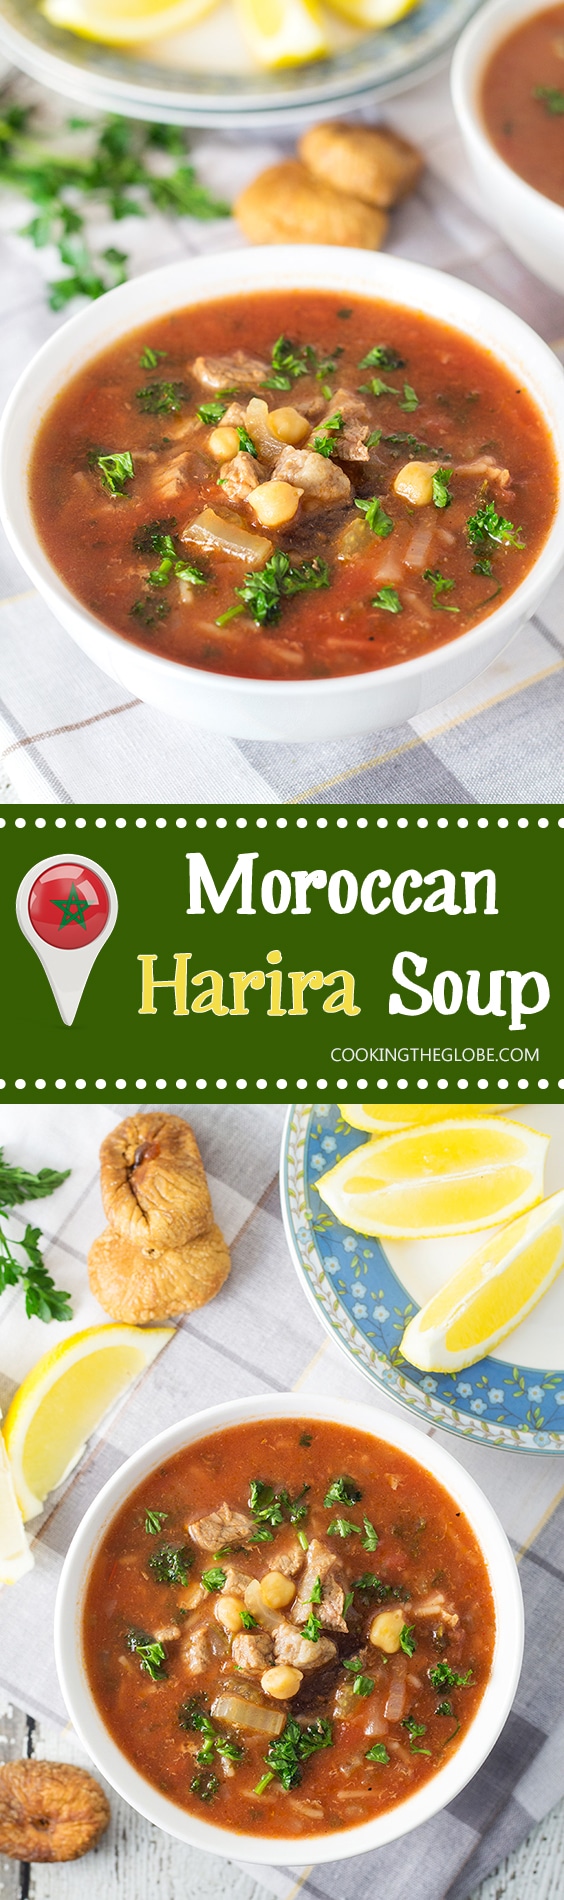 Harira soup comes from Morocco and combines beef, chickpeas, plenty of tomatoes, a few herbs and of course spices! | cookingtheglobe.com